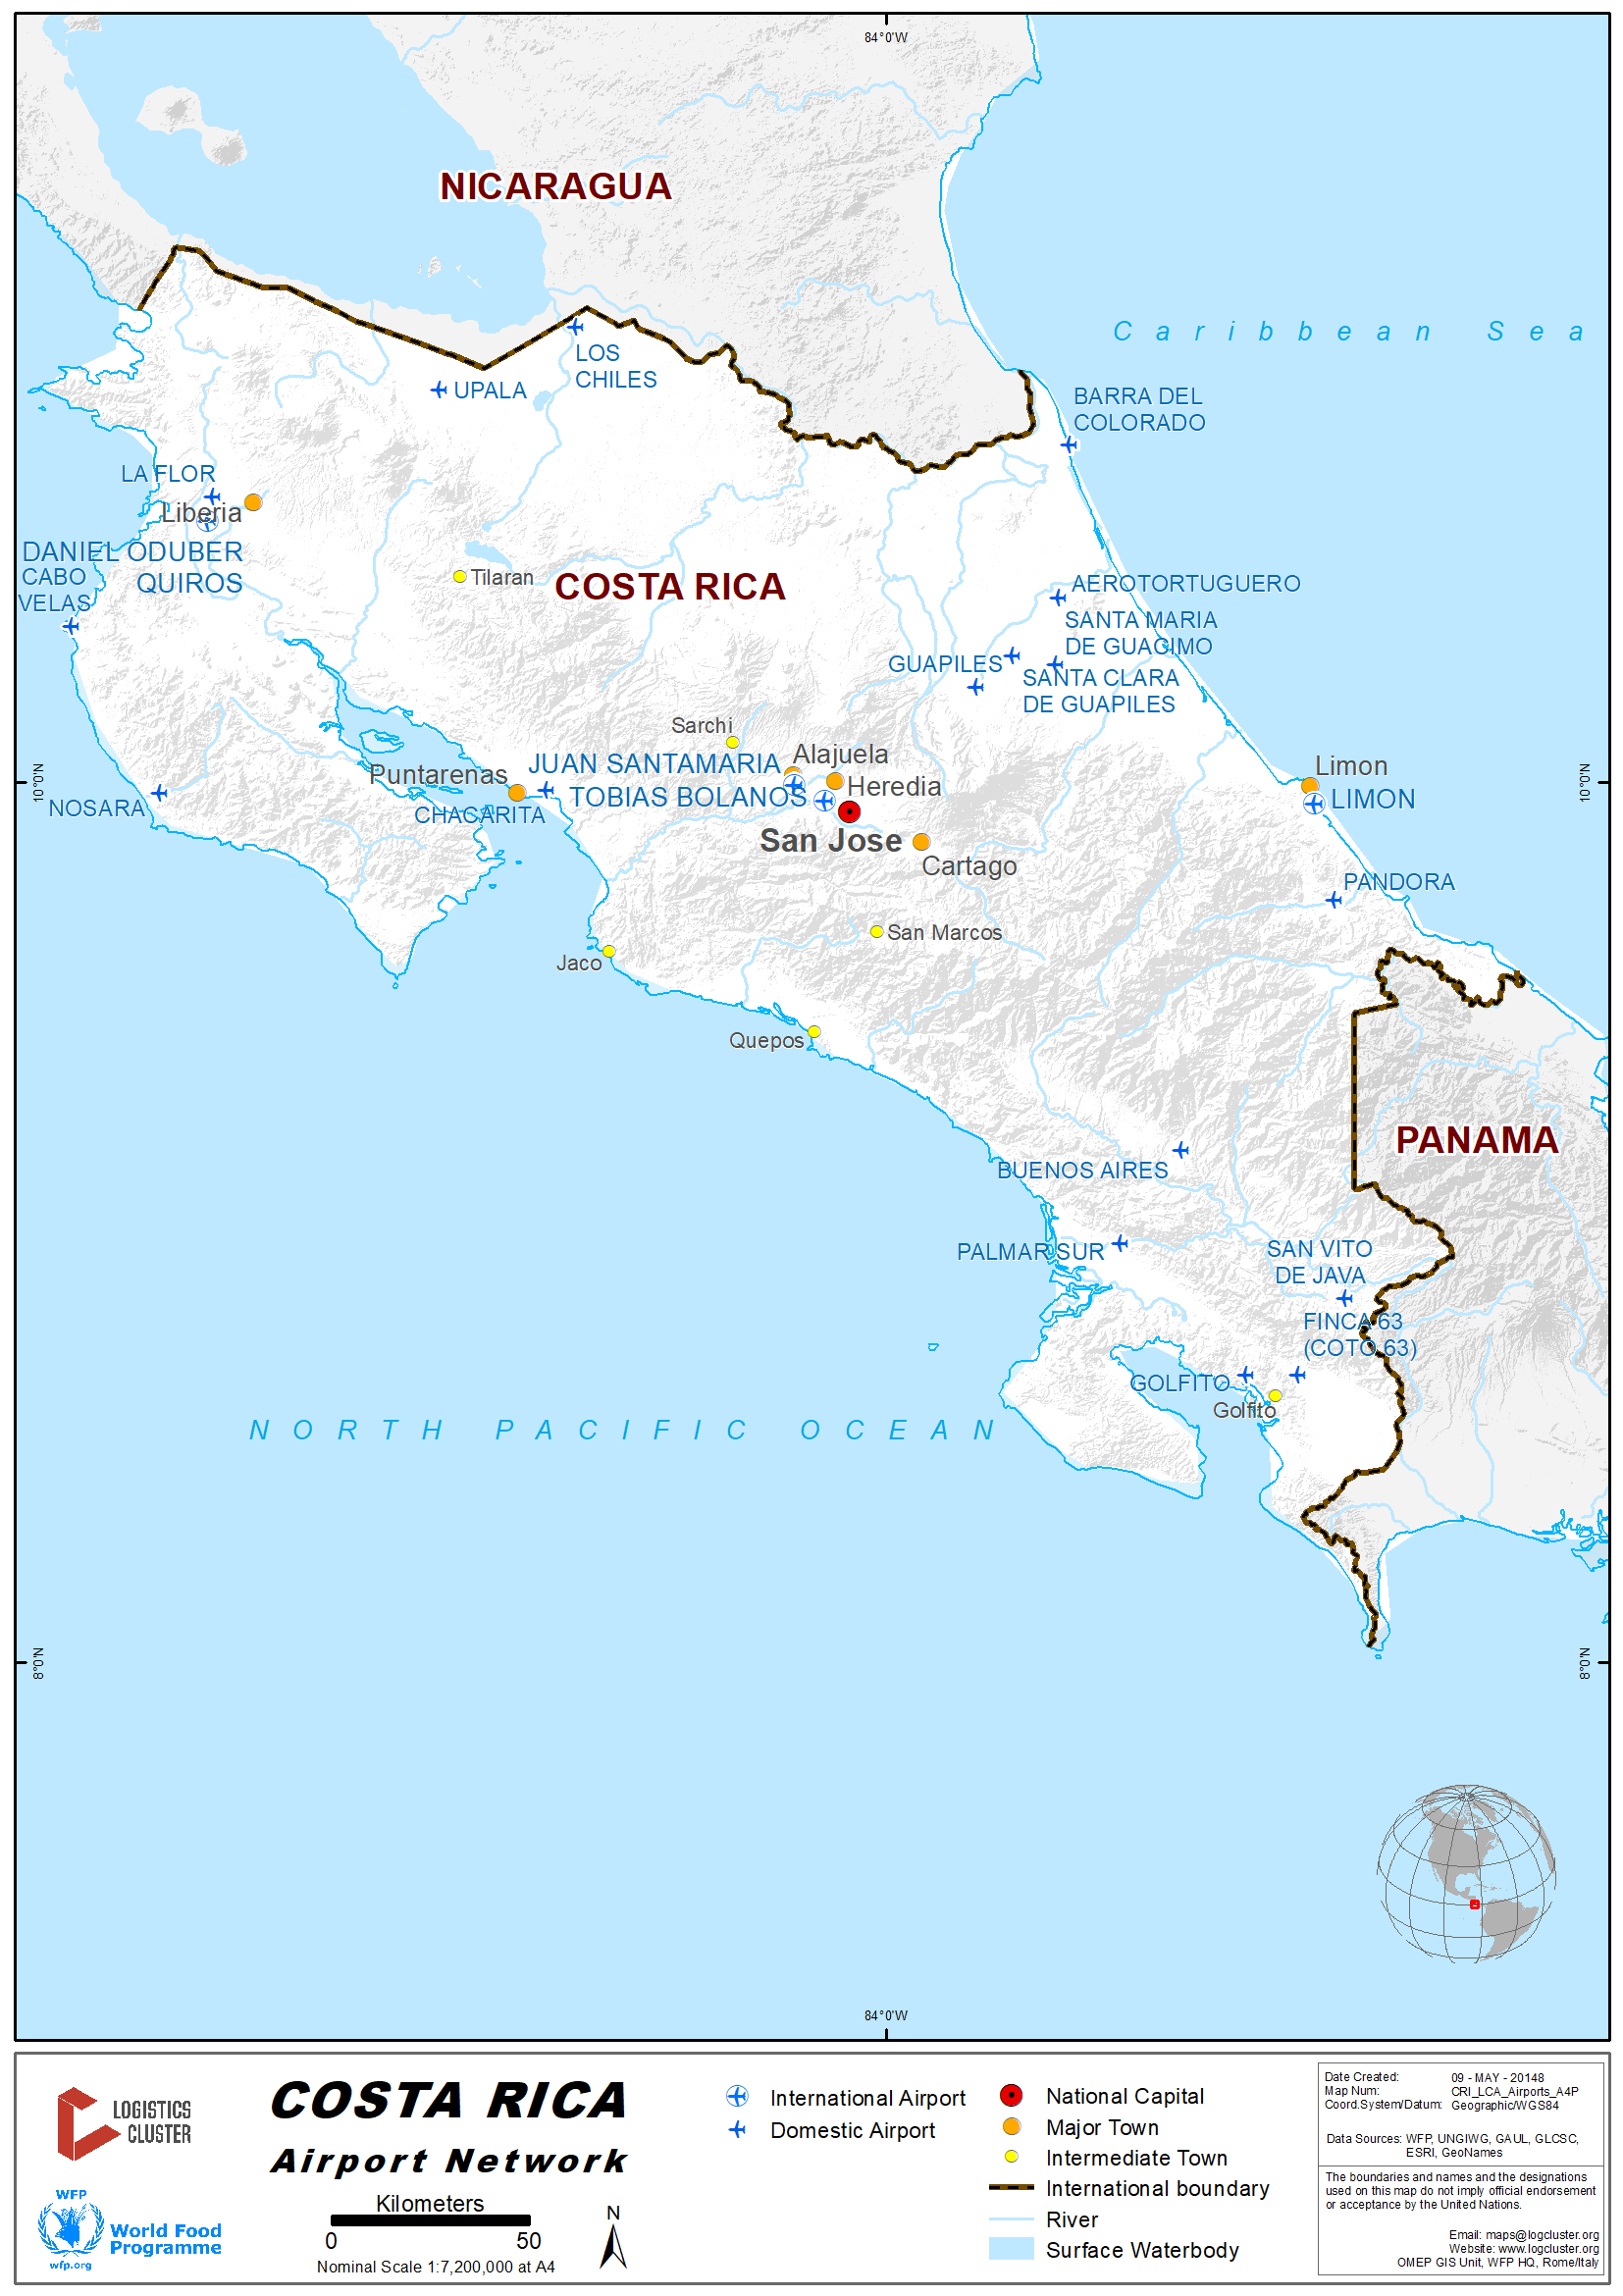 Costa Rica Airport Network Map